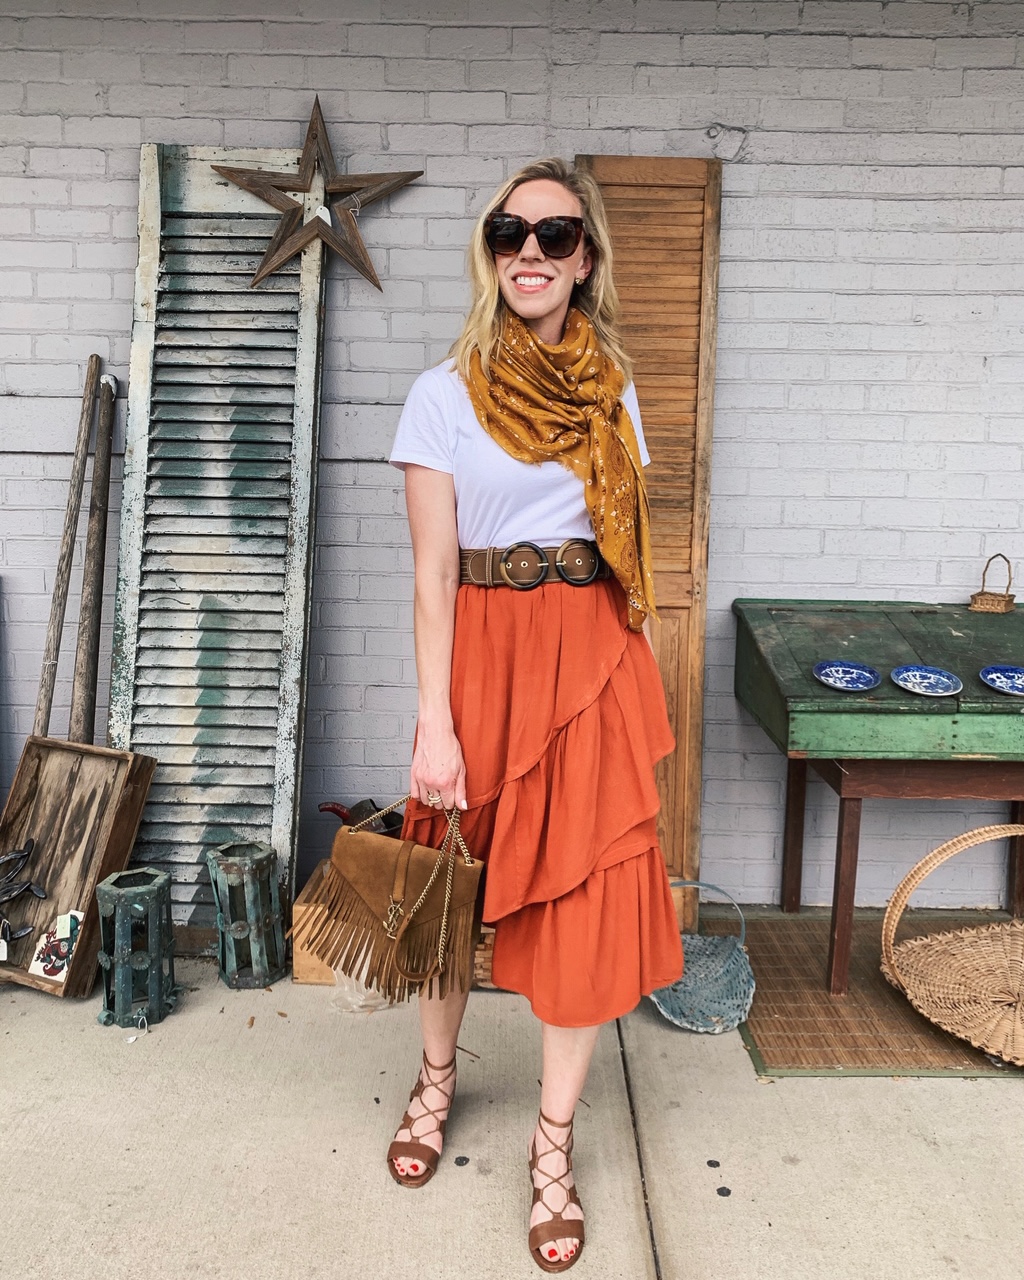 Meagan Brandon fashion blogger of Meagan's Moda shows how to wear and  orange skirt for summer with white tee and printed bandana scarf - Meagan's  Moda